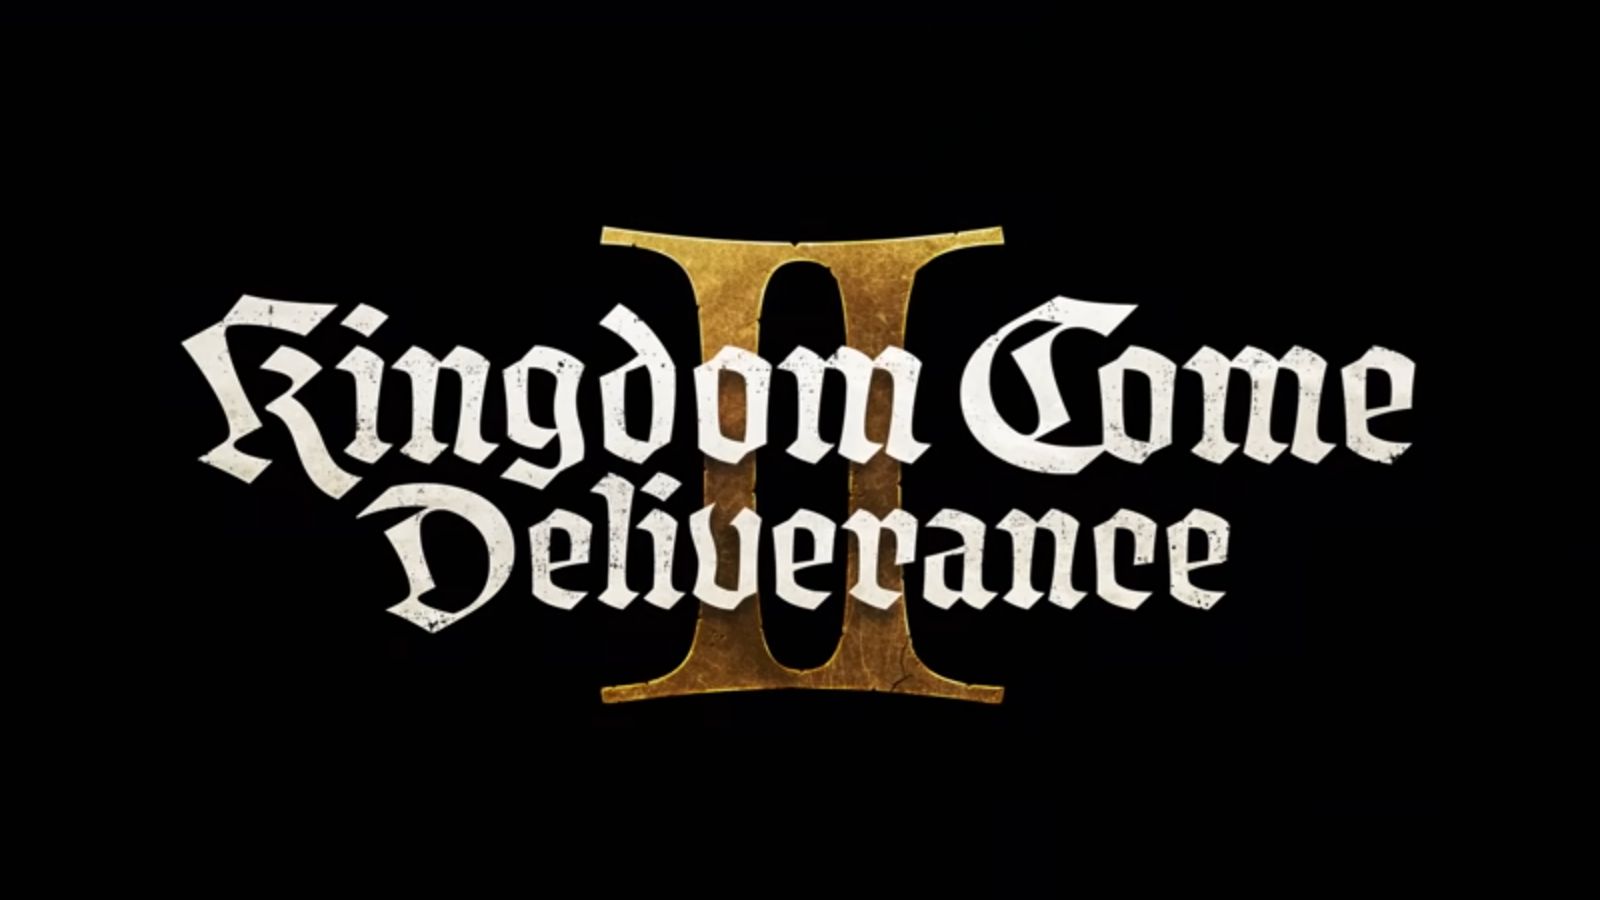 Kingdom Come: Deliverance II -- Adaptive music engineering and composition